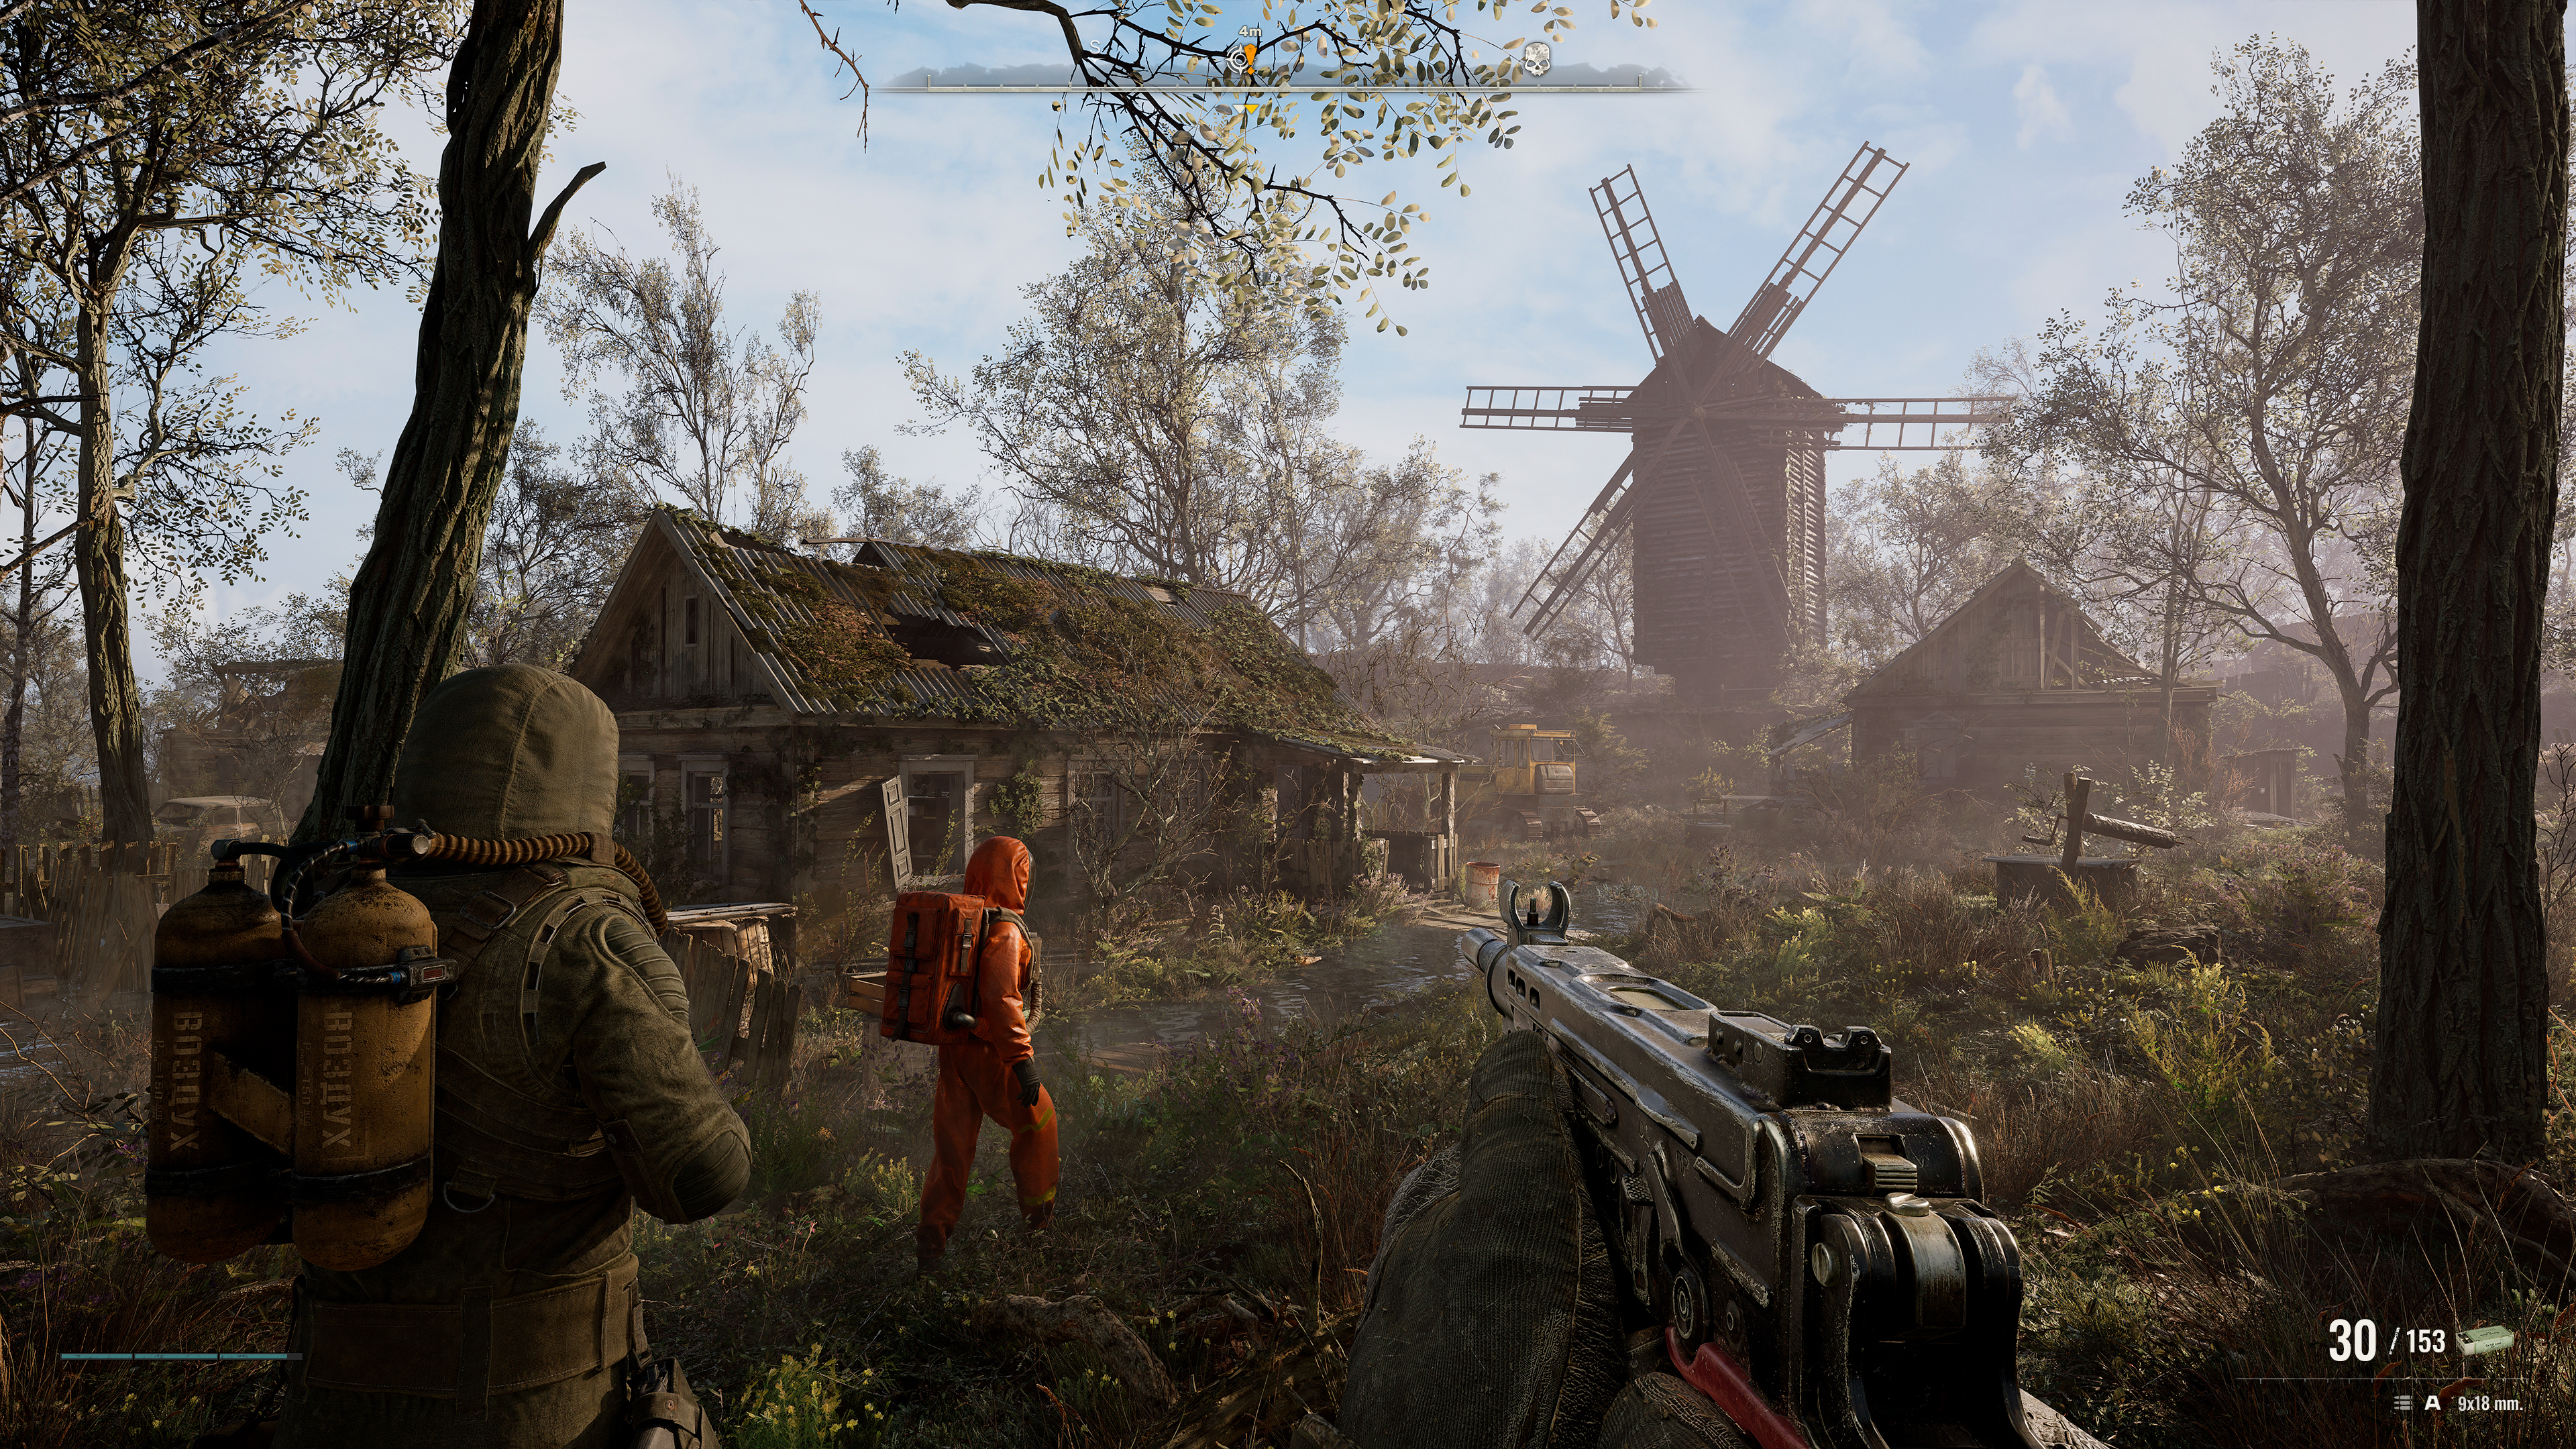 The first-person player character keeps their assault rifle at the ready, following two other armed characters in full-body protective gear towards a thickly overgrown cottage and windmill in STALKER 2